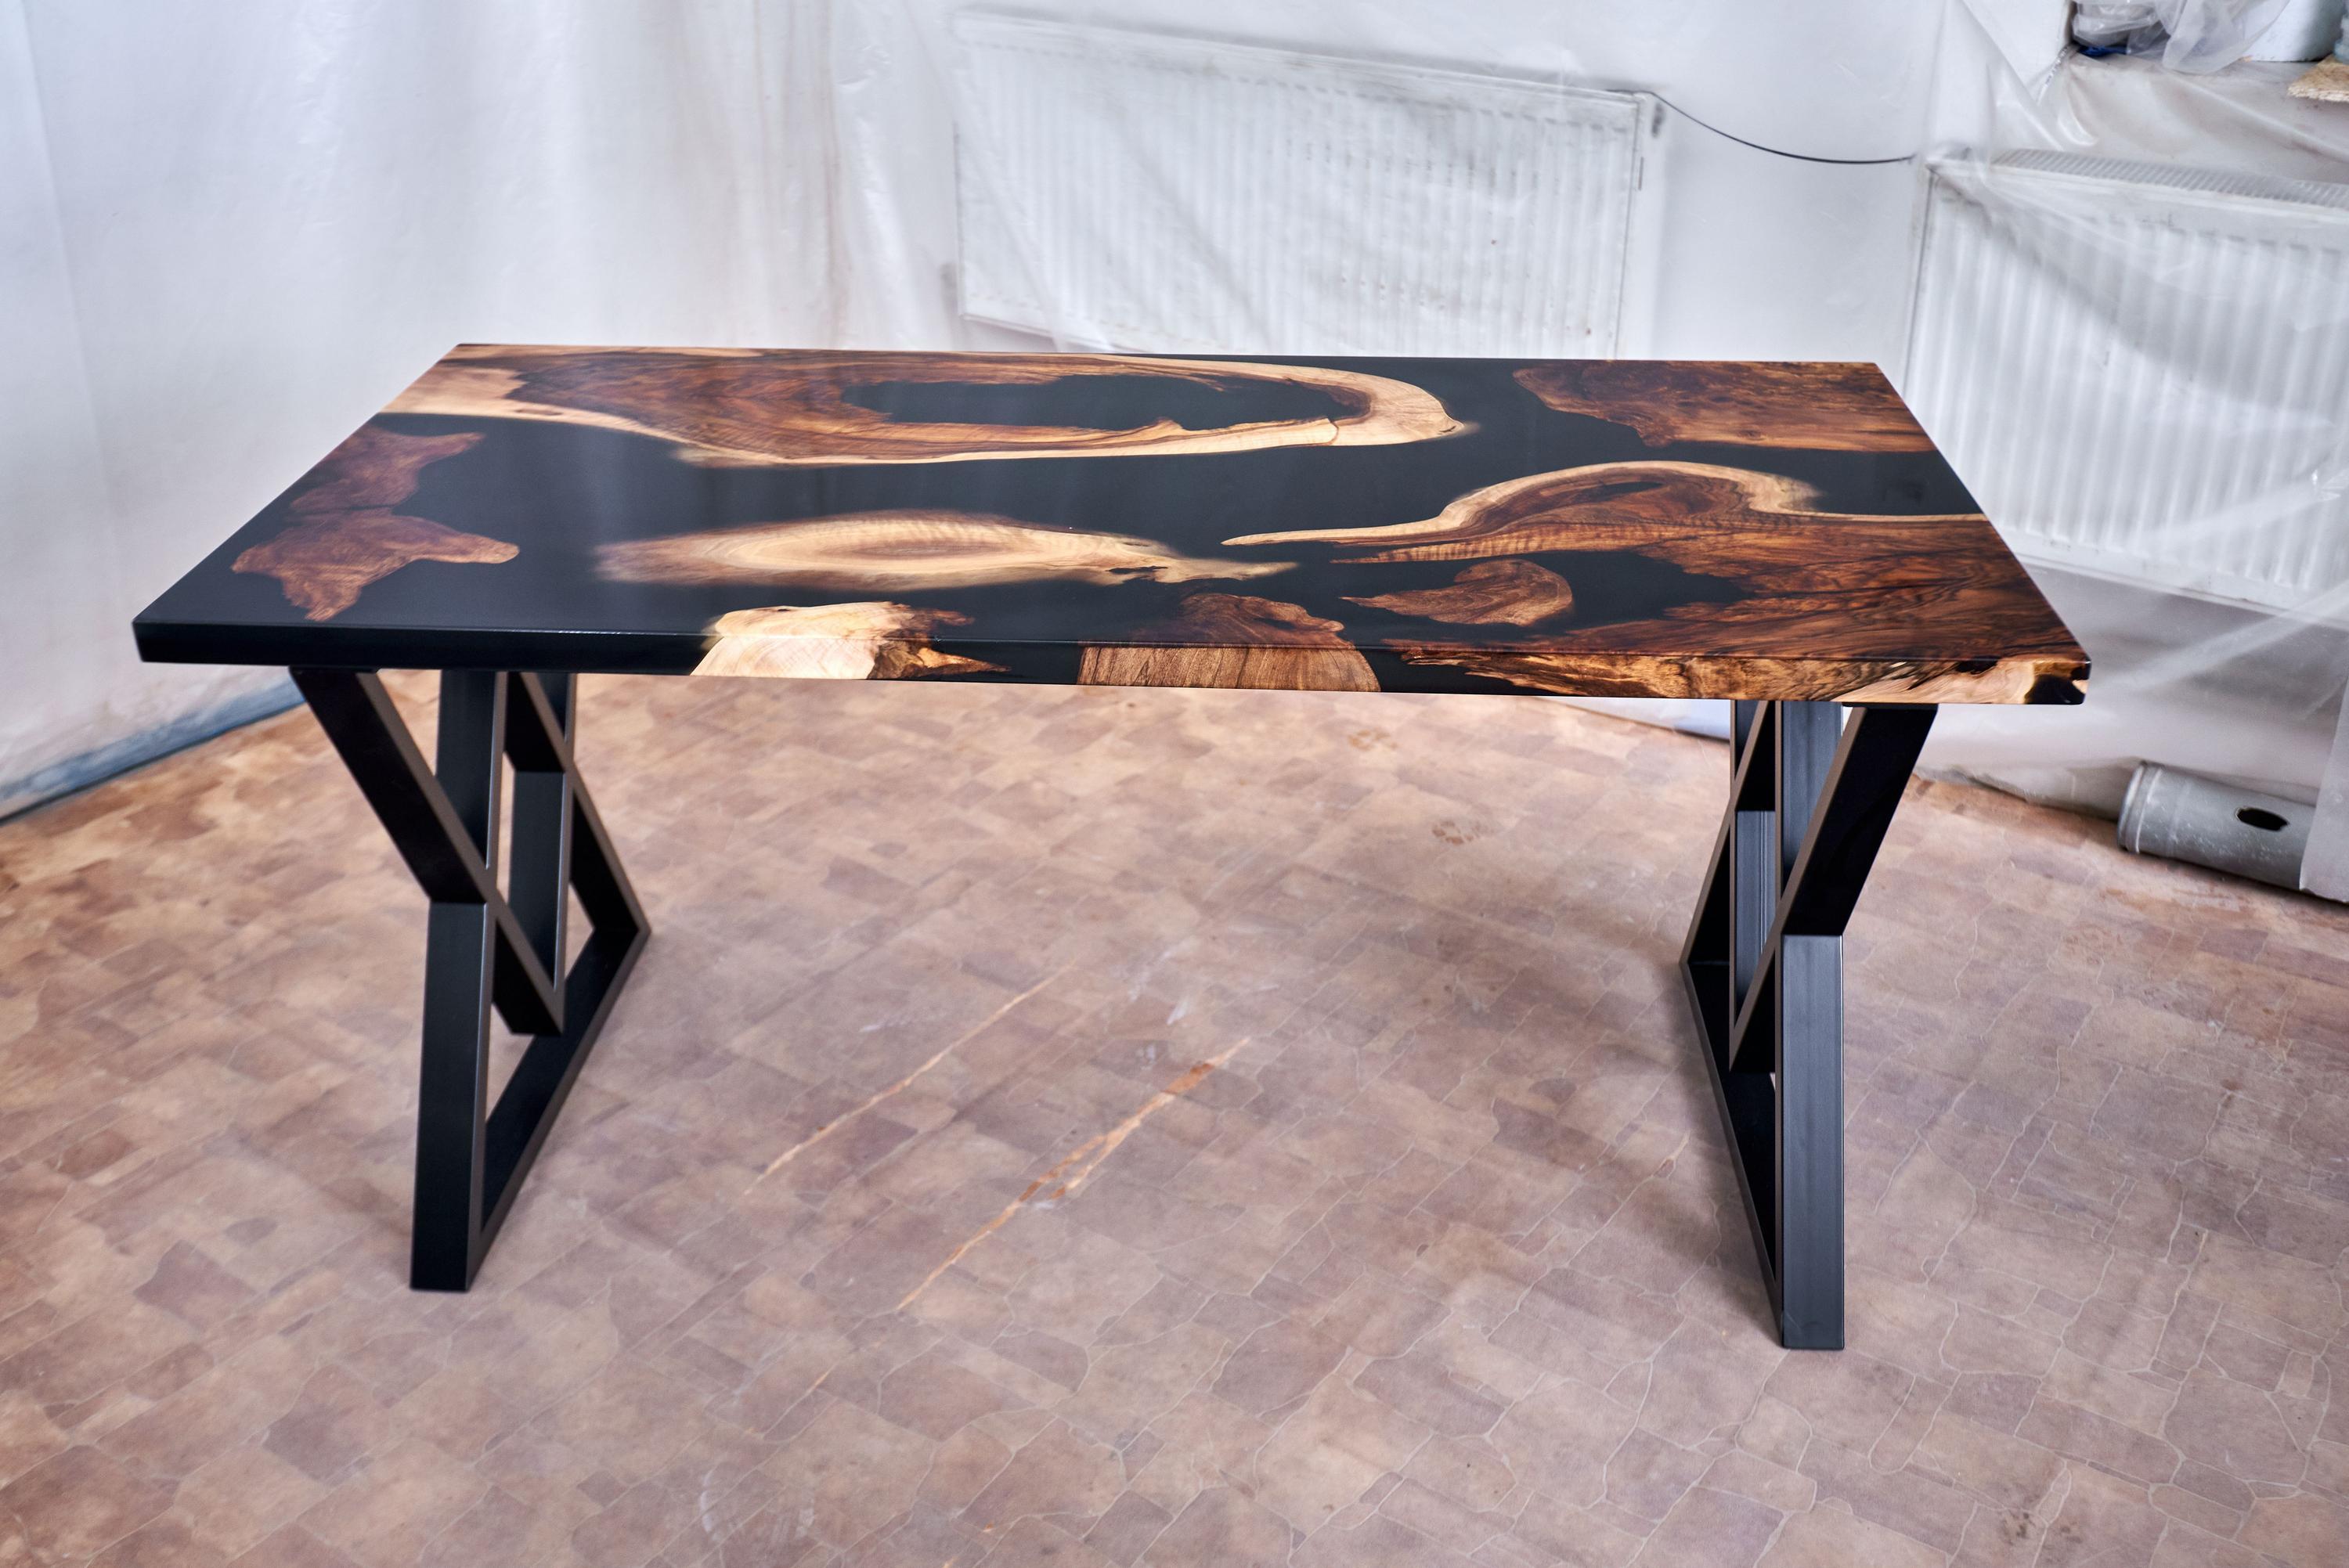 European Midcentury Modern Dining Table Contemporary Dining Table Handmade Rustic Tables For Sale